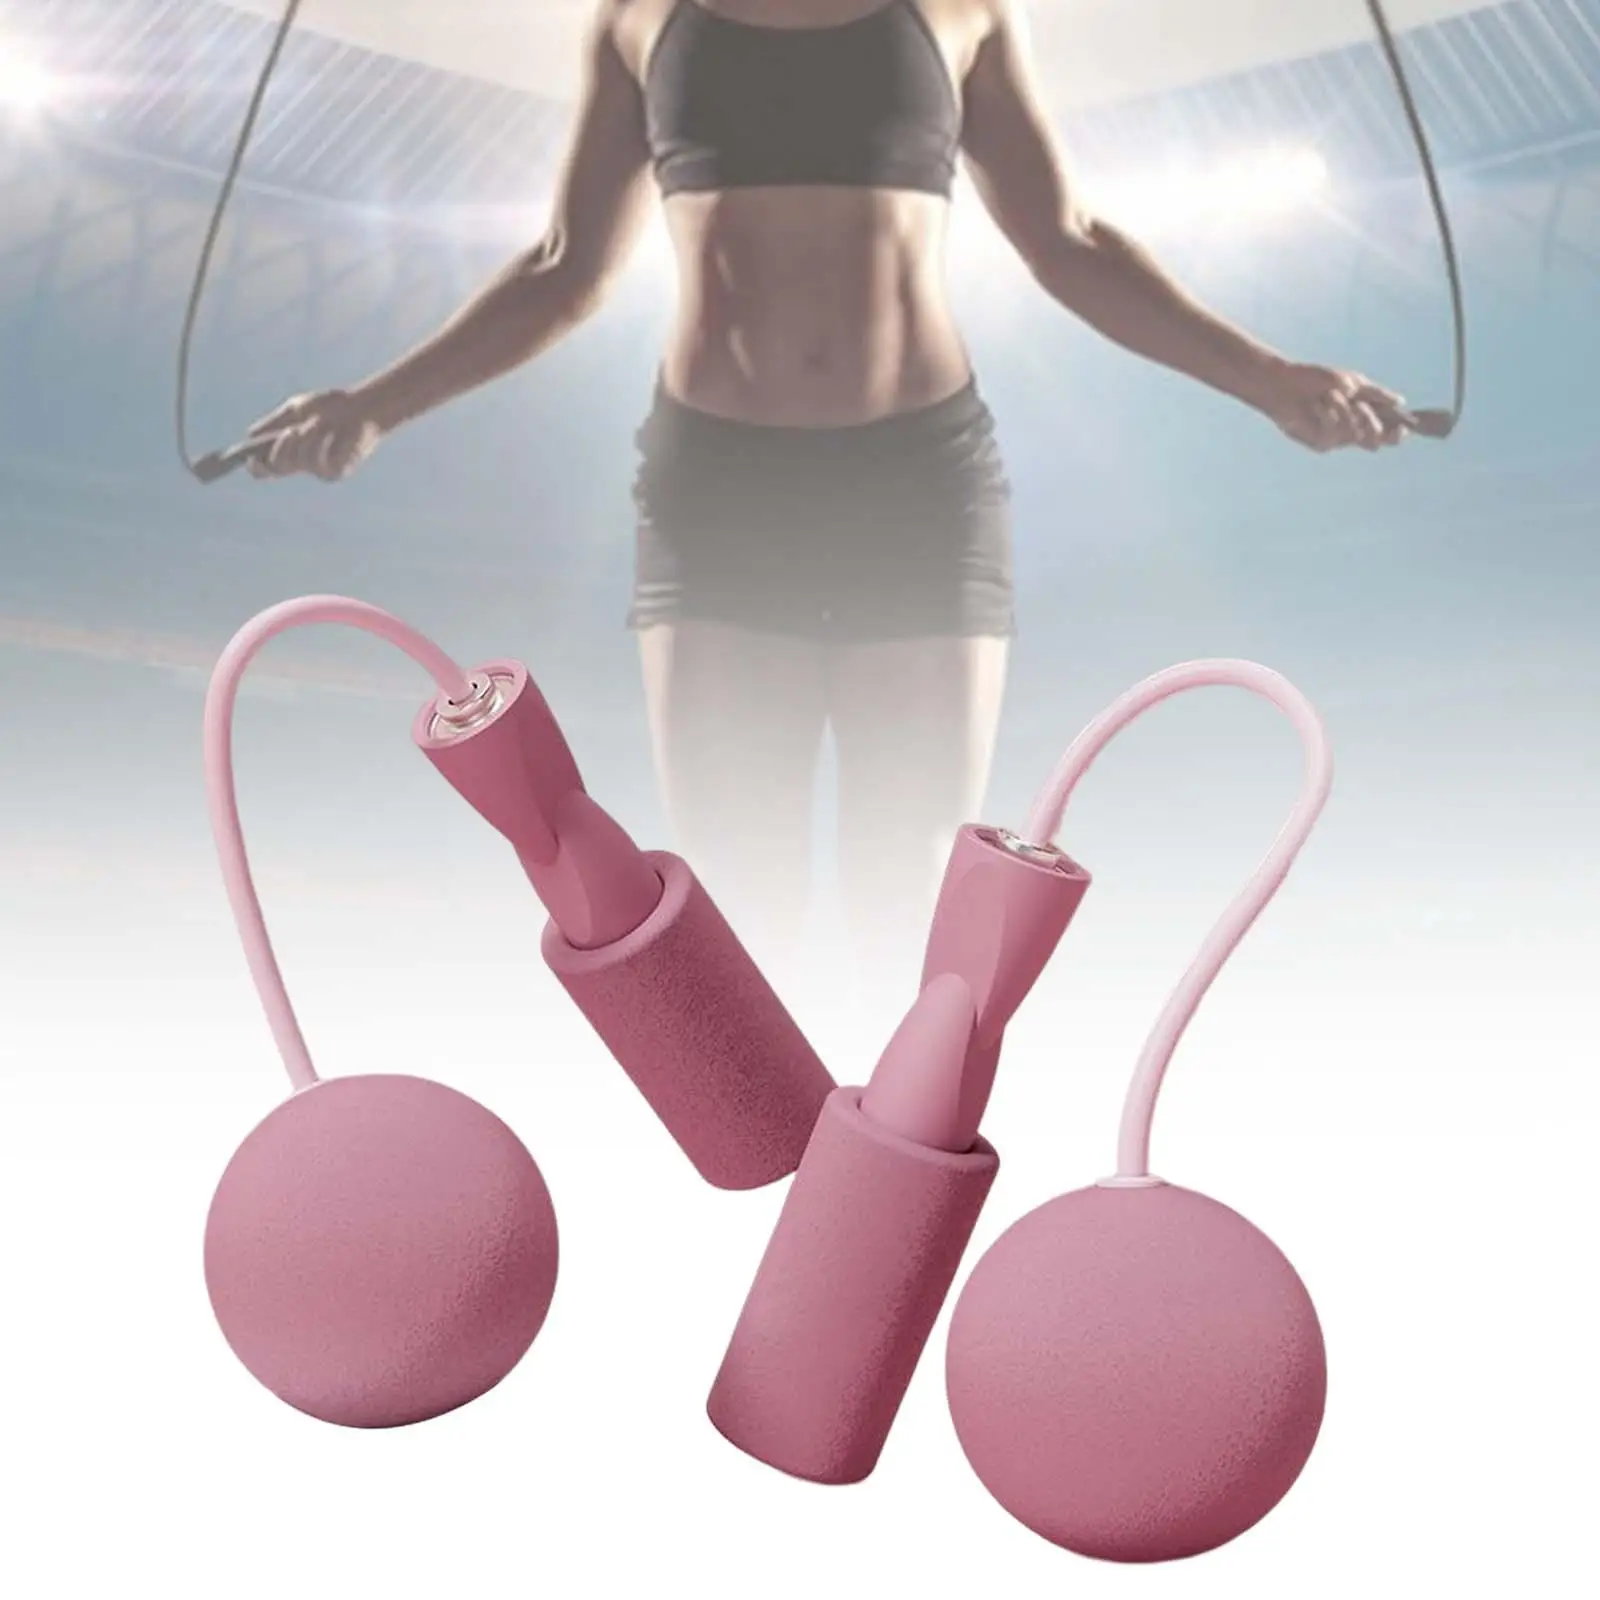 Cordless Jumping Rope Exercise Endurance Training Skipping Rope Workout Sports Fitness Weighted Jump Rope for Women Men Kids